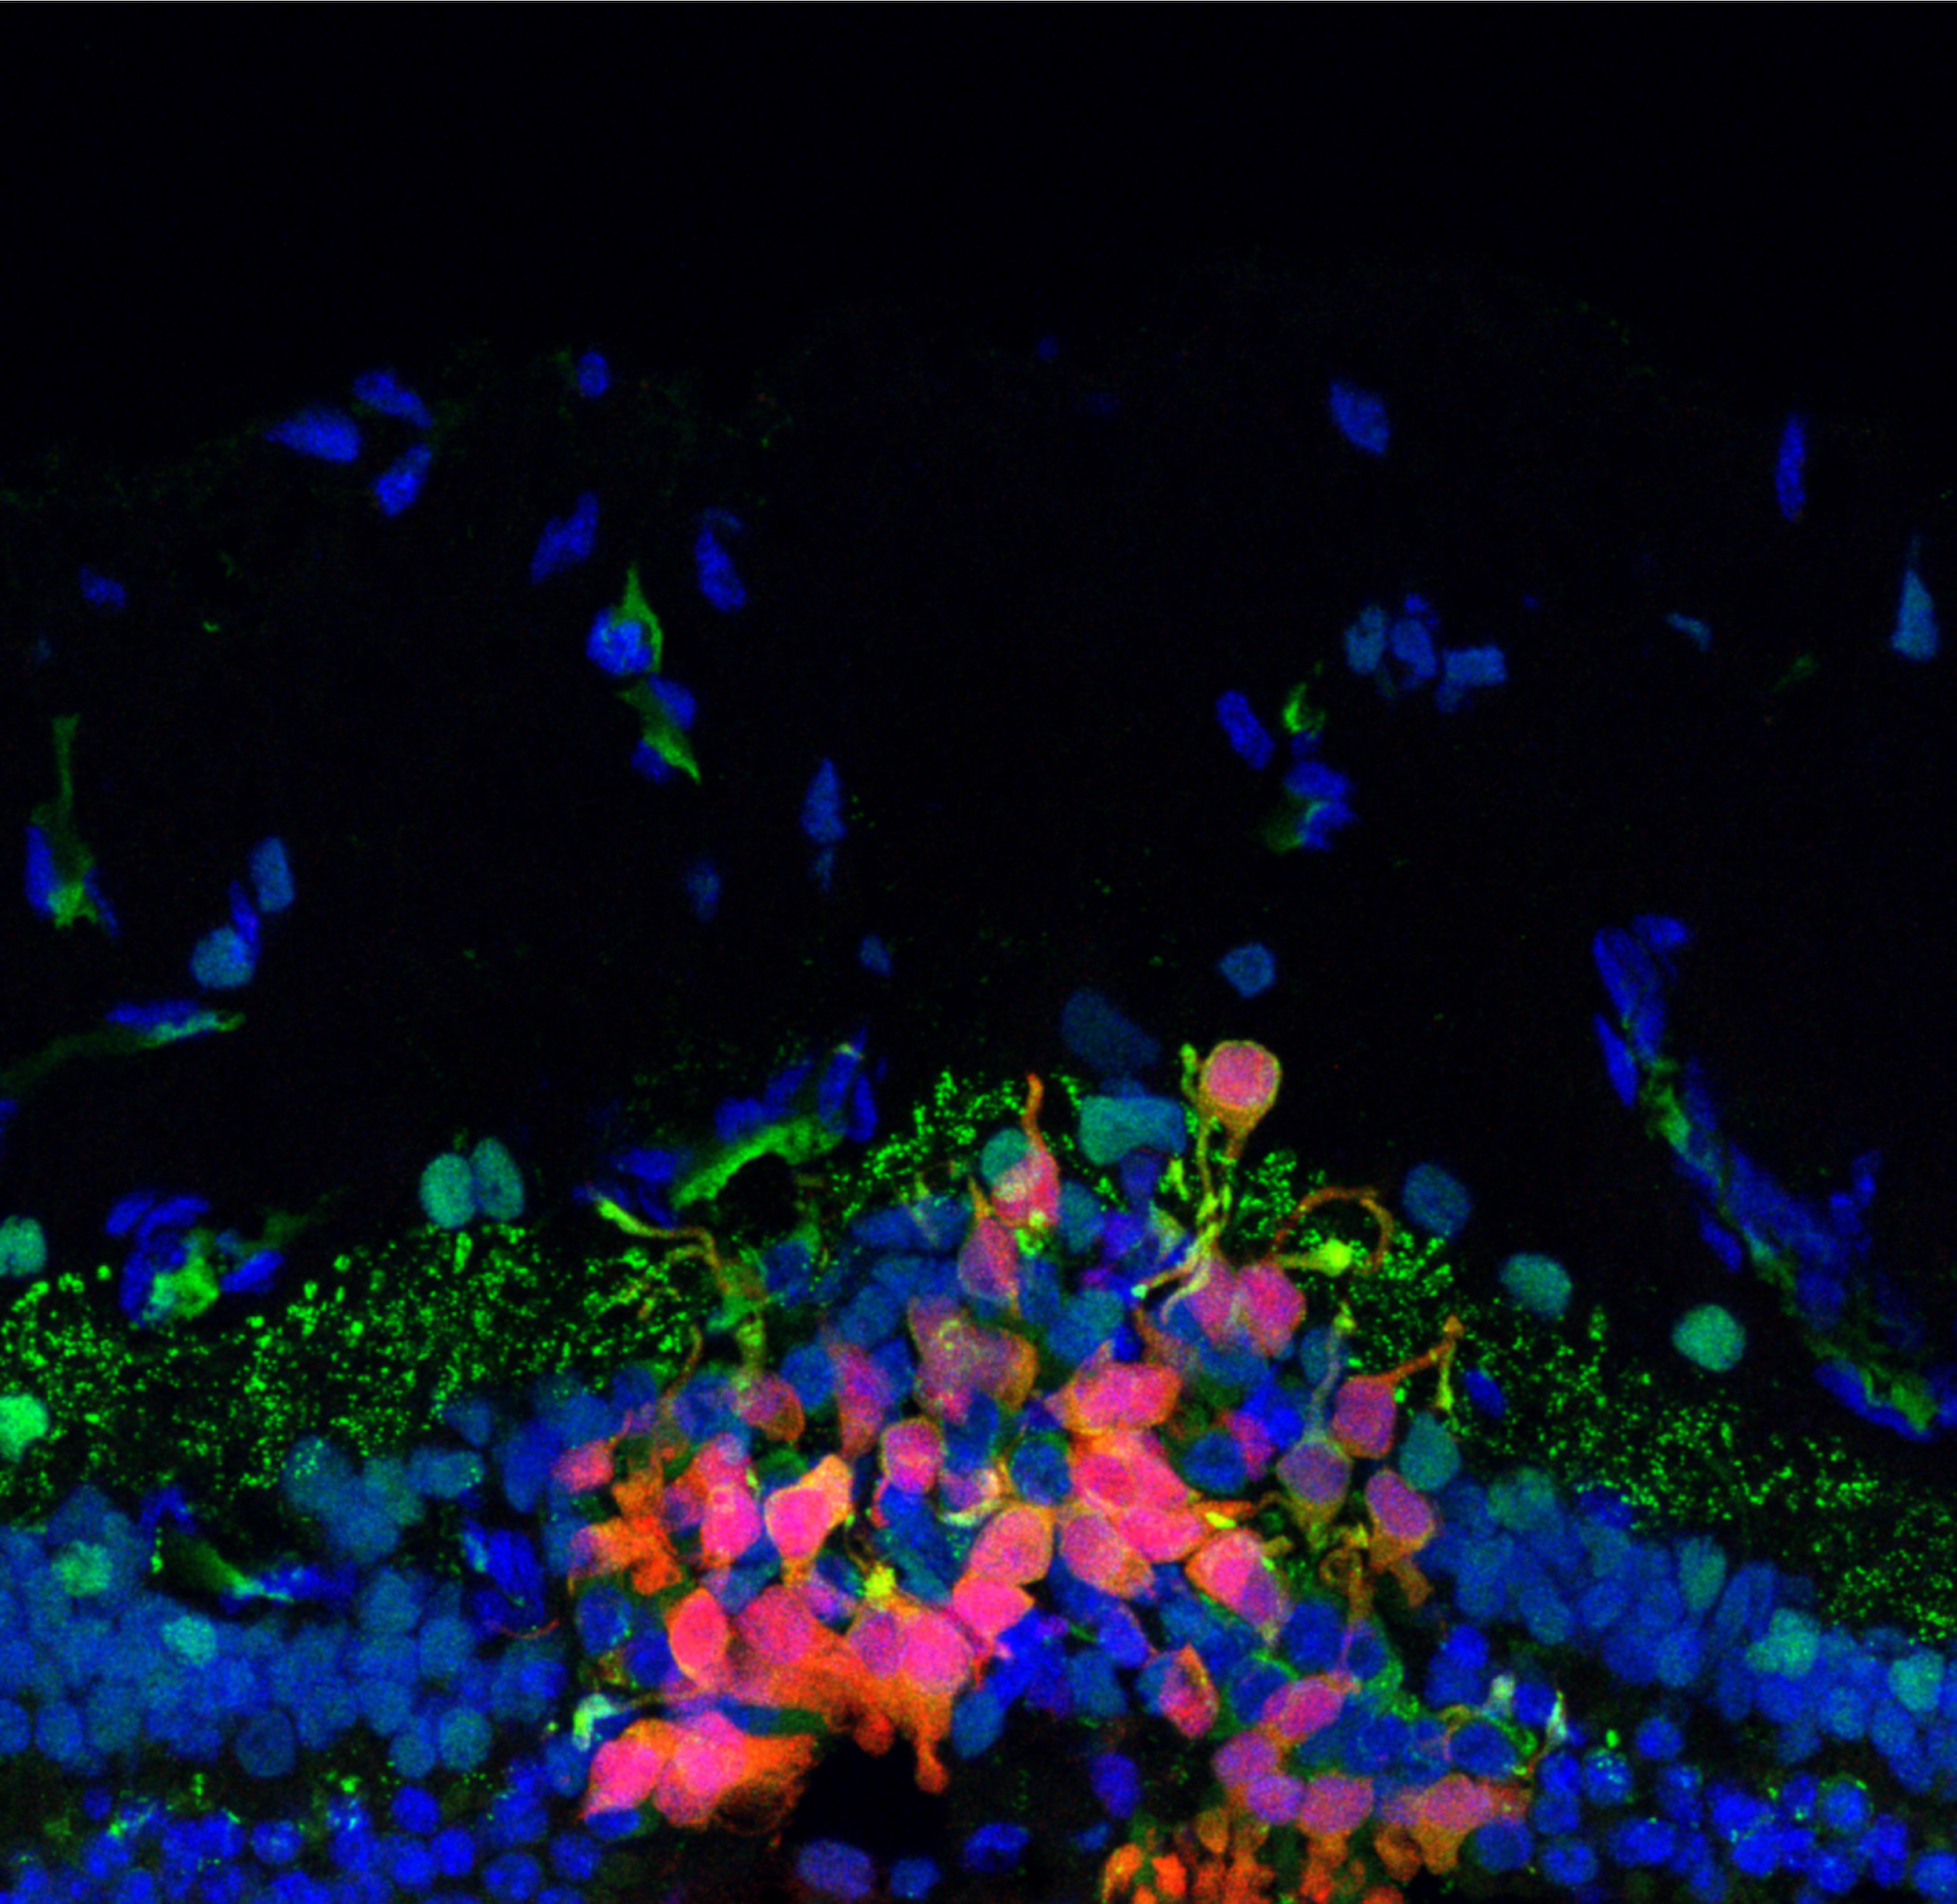 Fluorescent microscopy against a black background shows a layer of green flecks over a mix of blue and red labeled cells